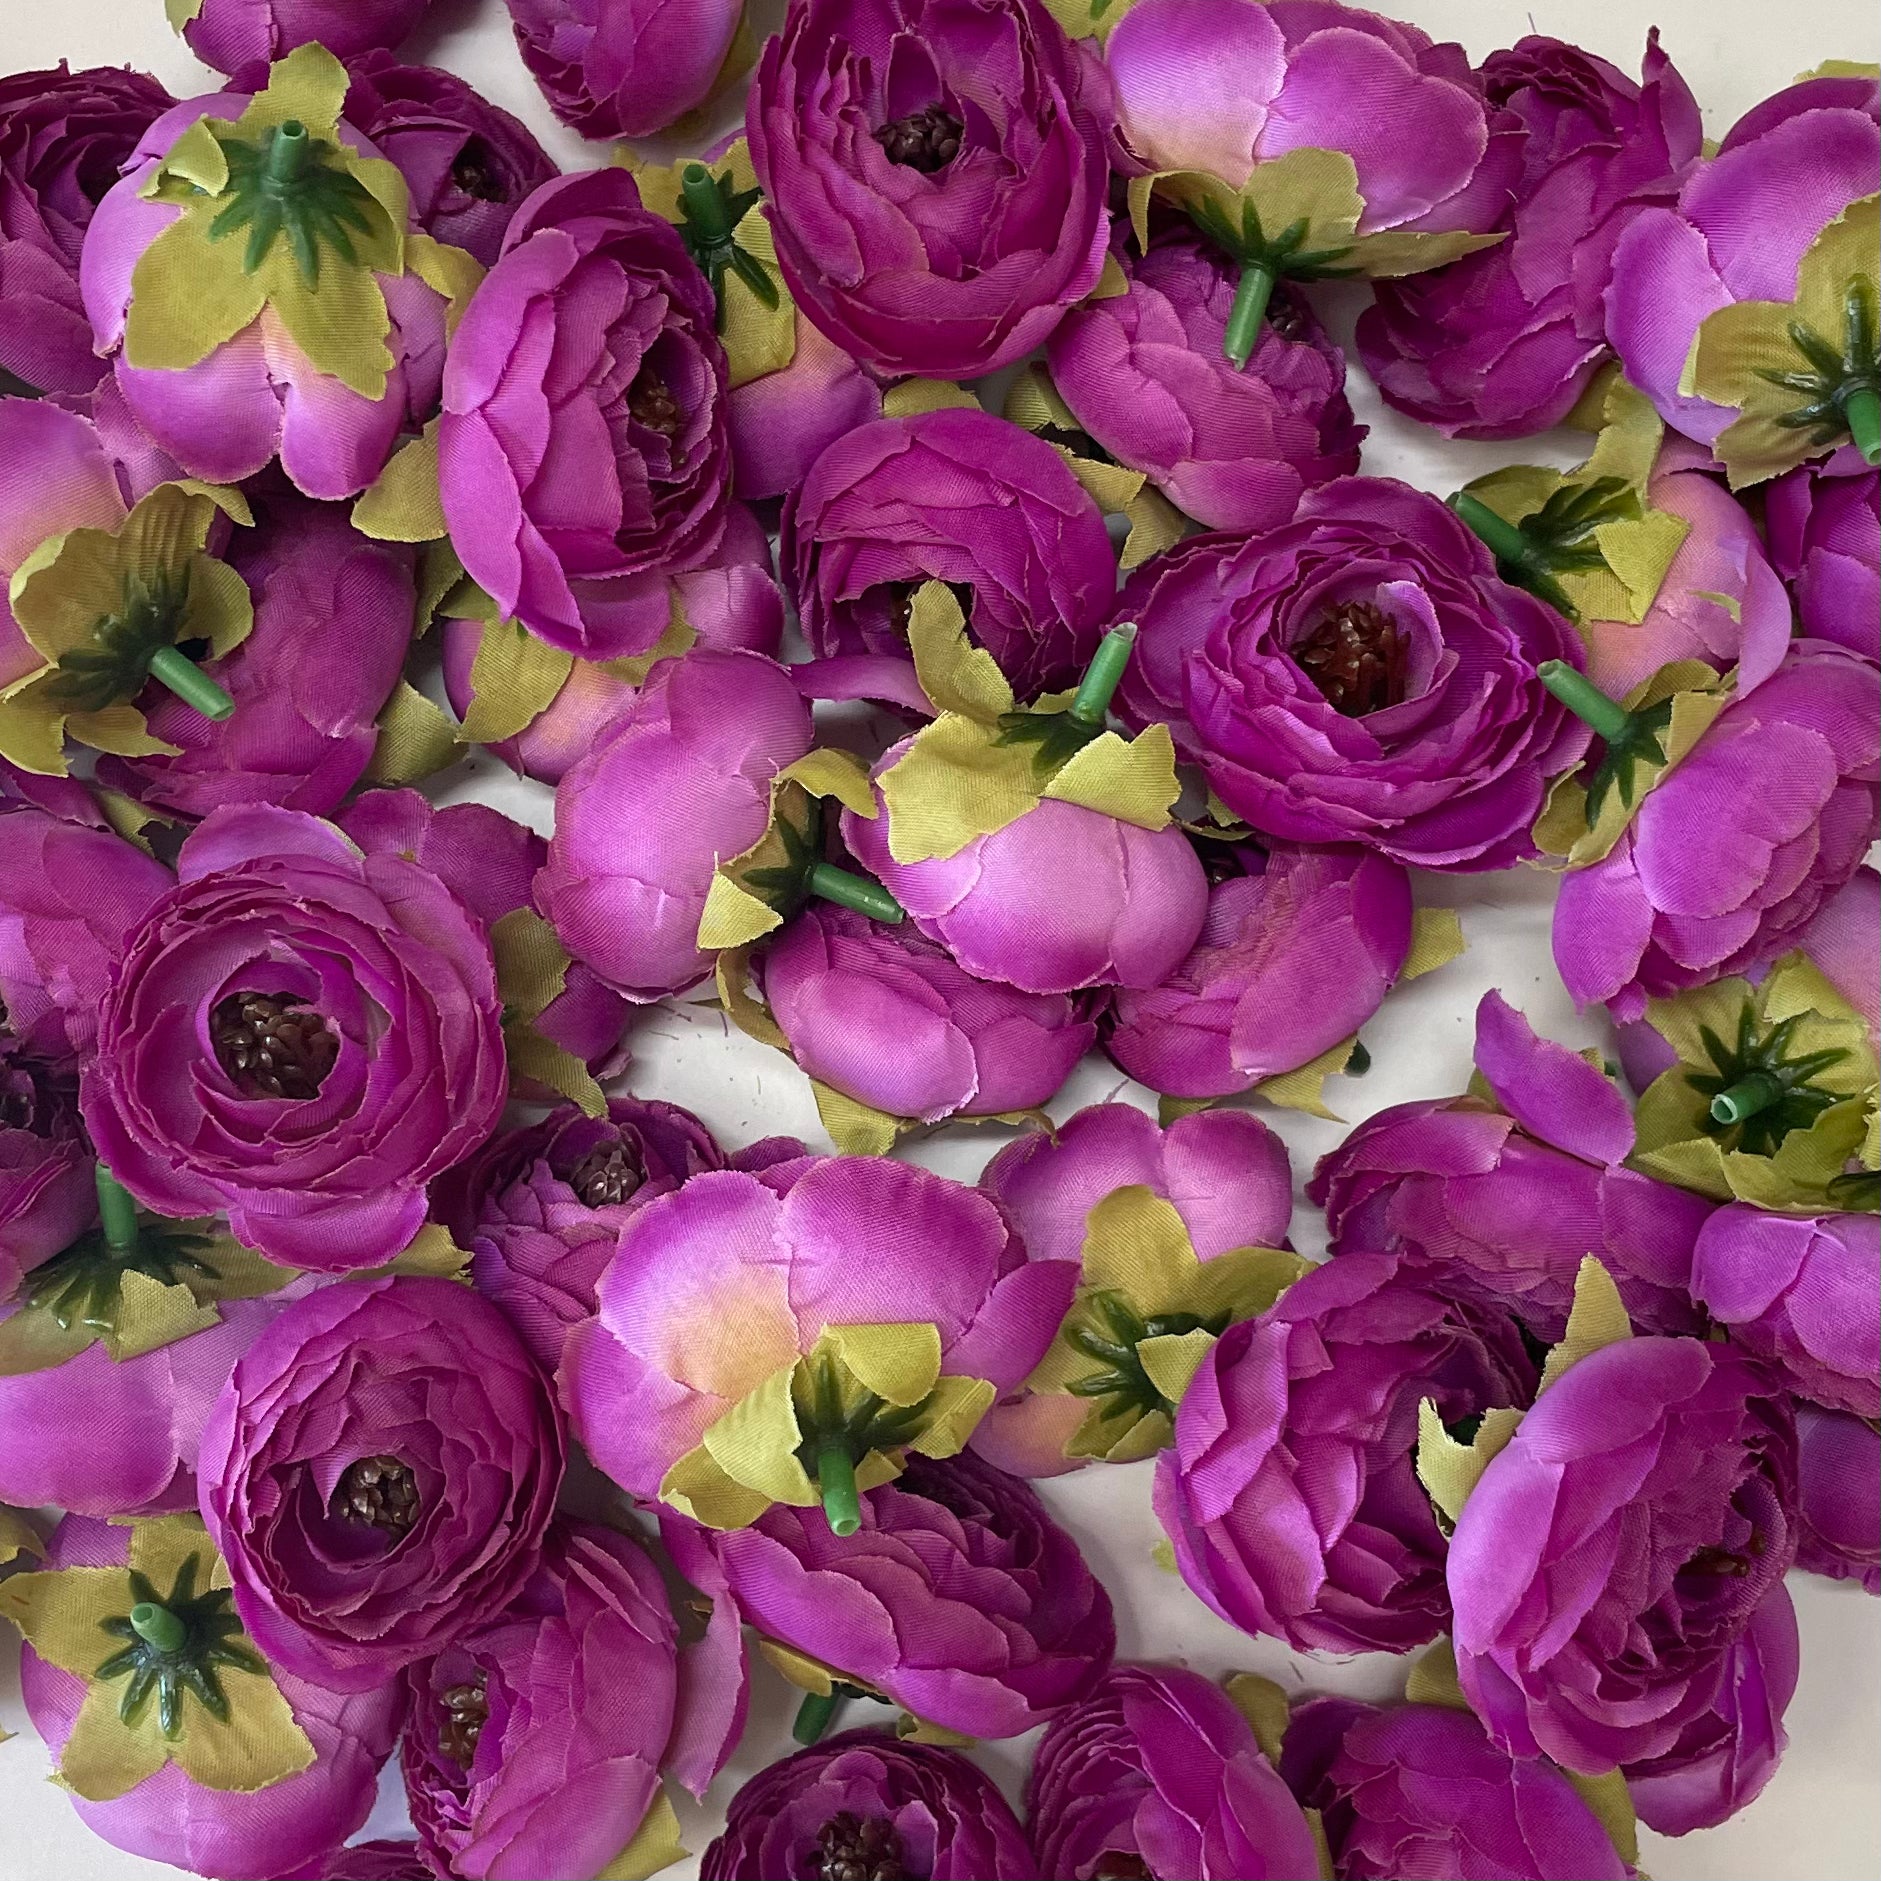 Artificial Flower Heads - Vibrant Purple Peony Style 20 - 5 Pack